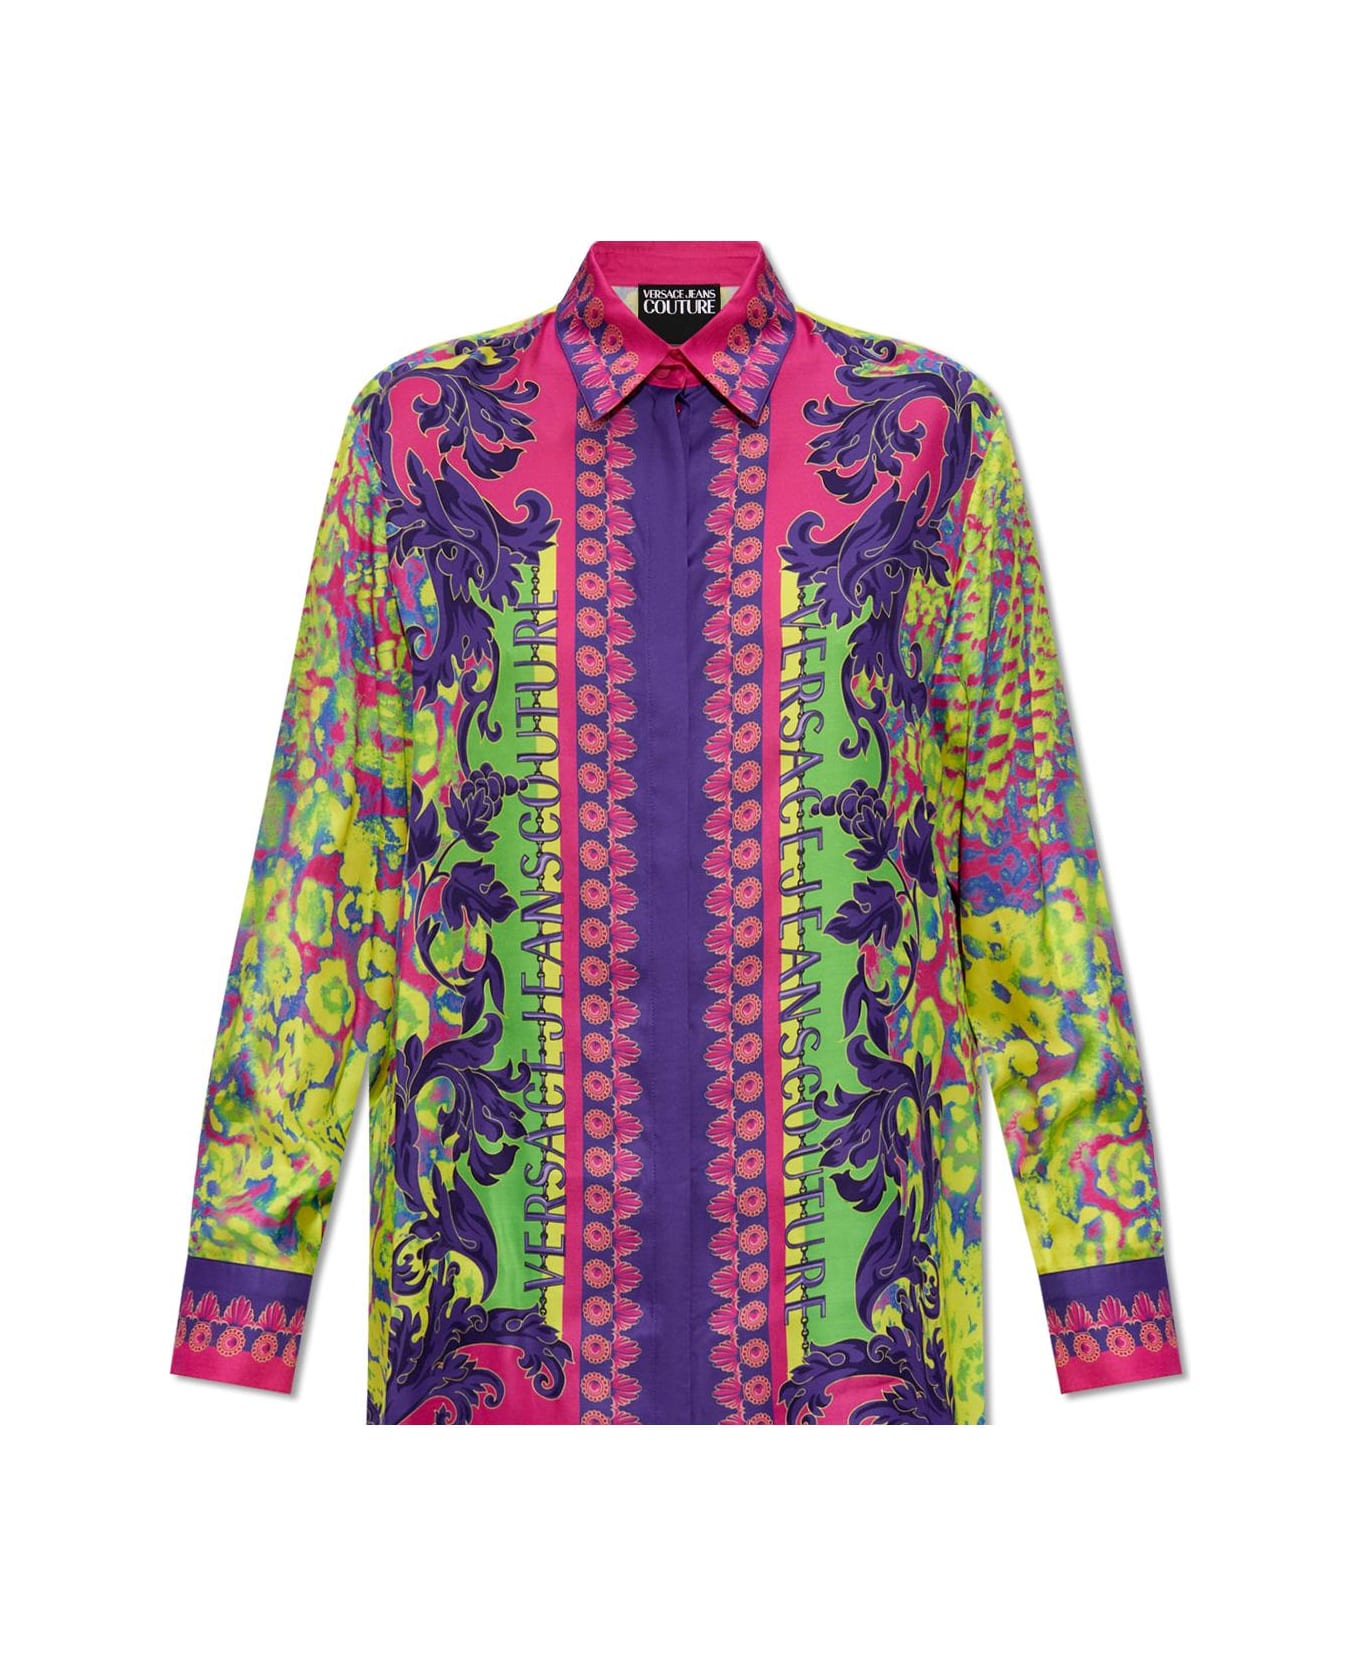 Versace Jeans Couture Shirt With Print And Logo - ACID 76 シャツ